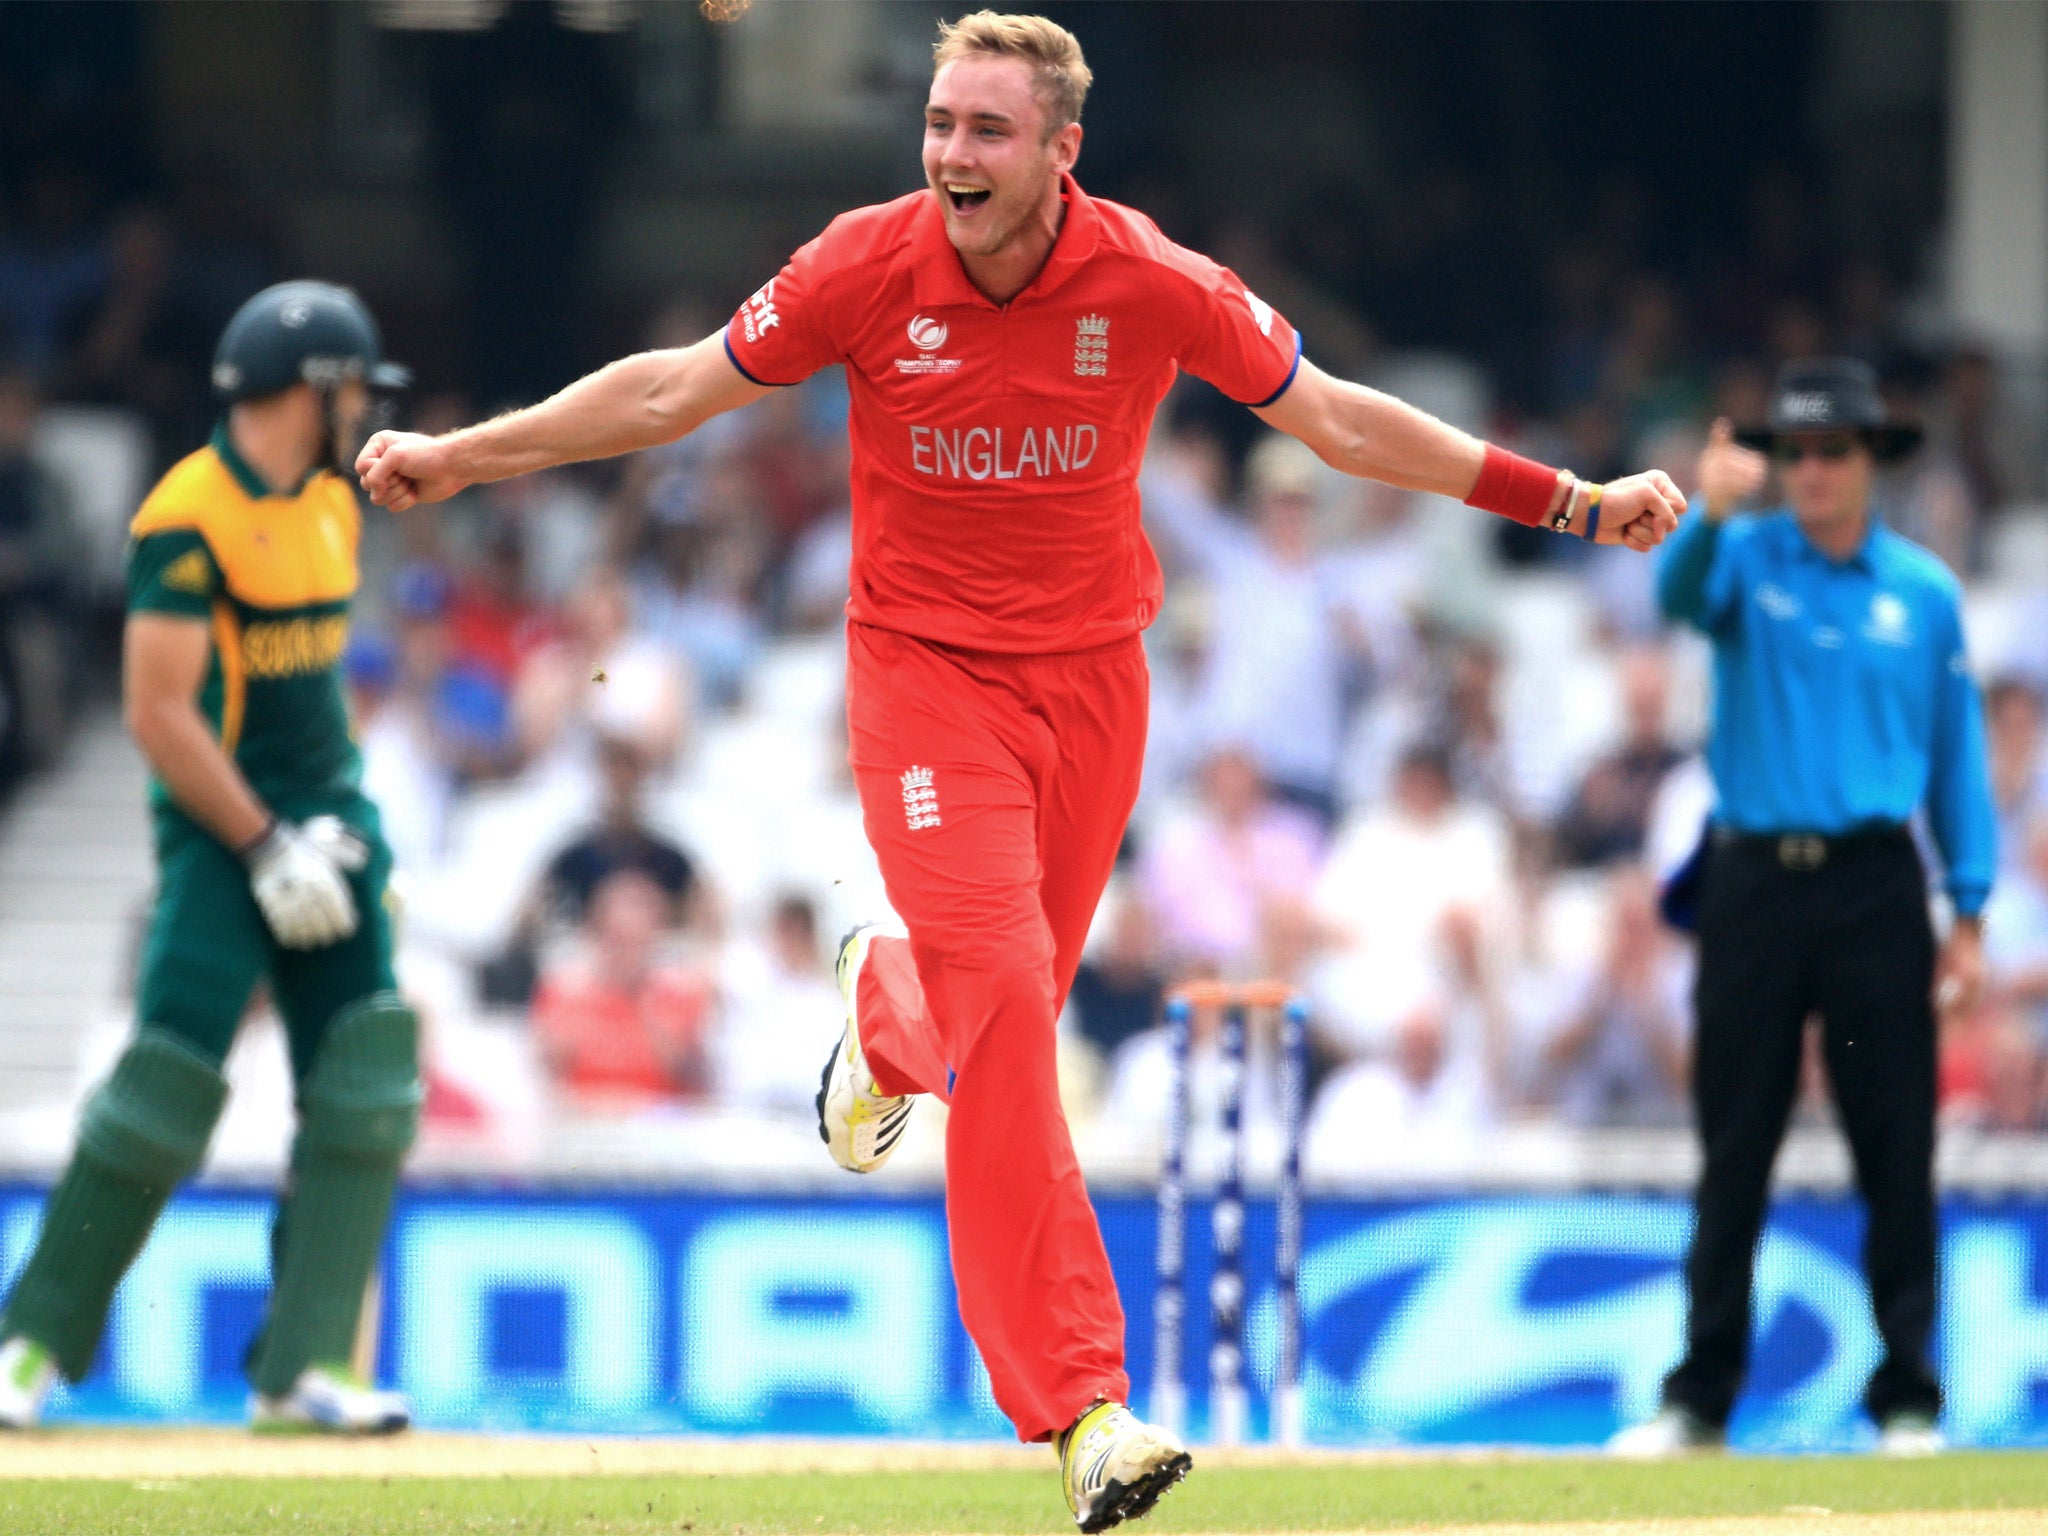 Stuart Broad celebrates taking the wicket of J P Duminy of South Africa first ball